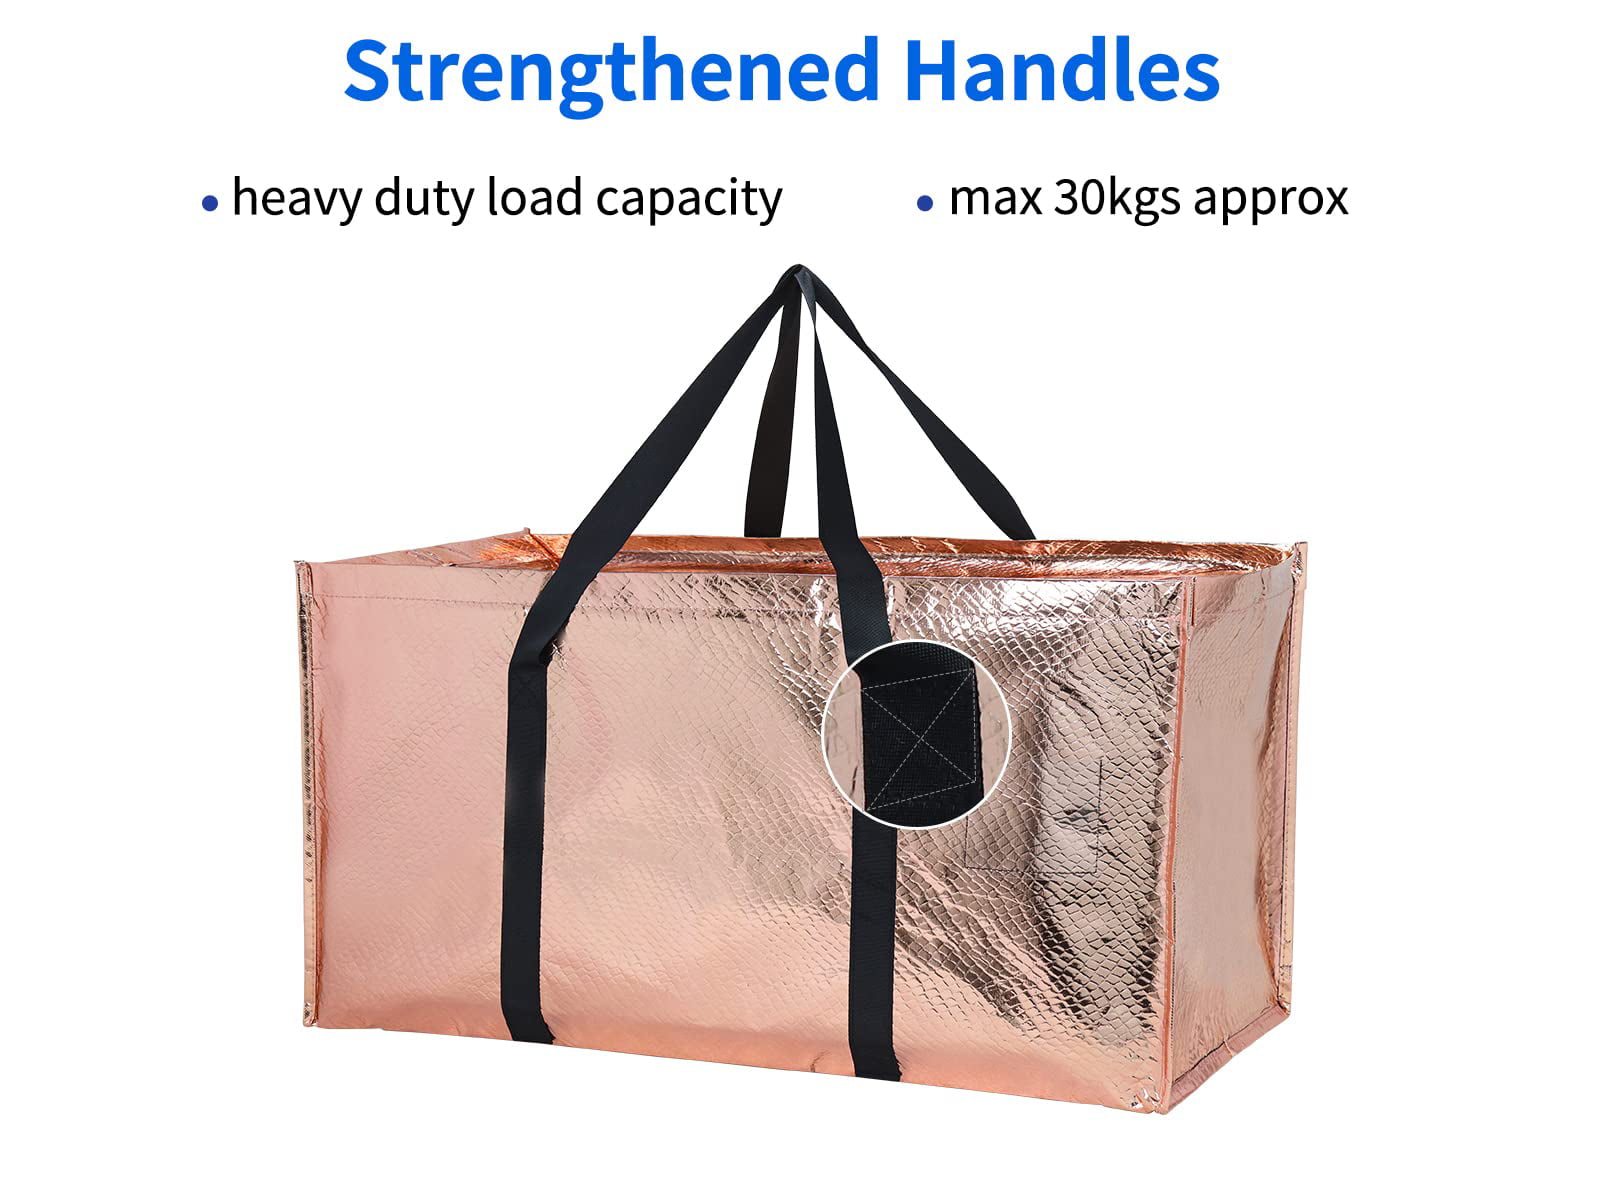 Generic (2) Heavy Duty WOVEN FABRIC Storage Bag, Translucent Moving Bag  Totes with Zippers for Clothing Blanket Storage, Dorm College Supplies Box